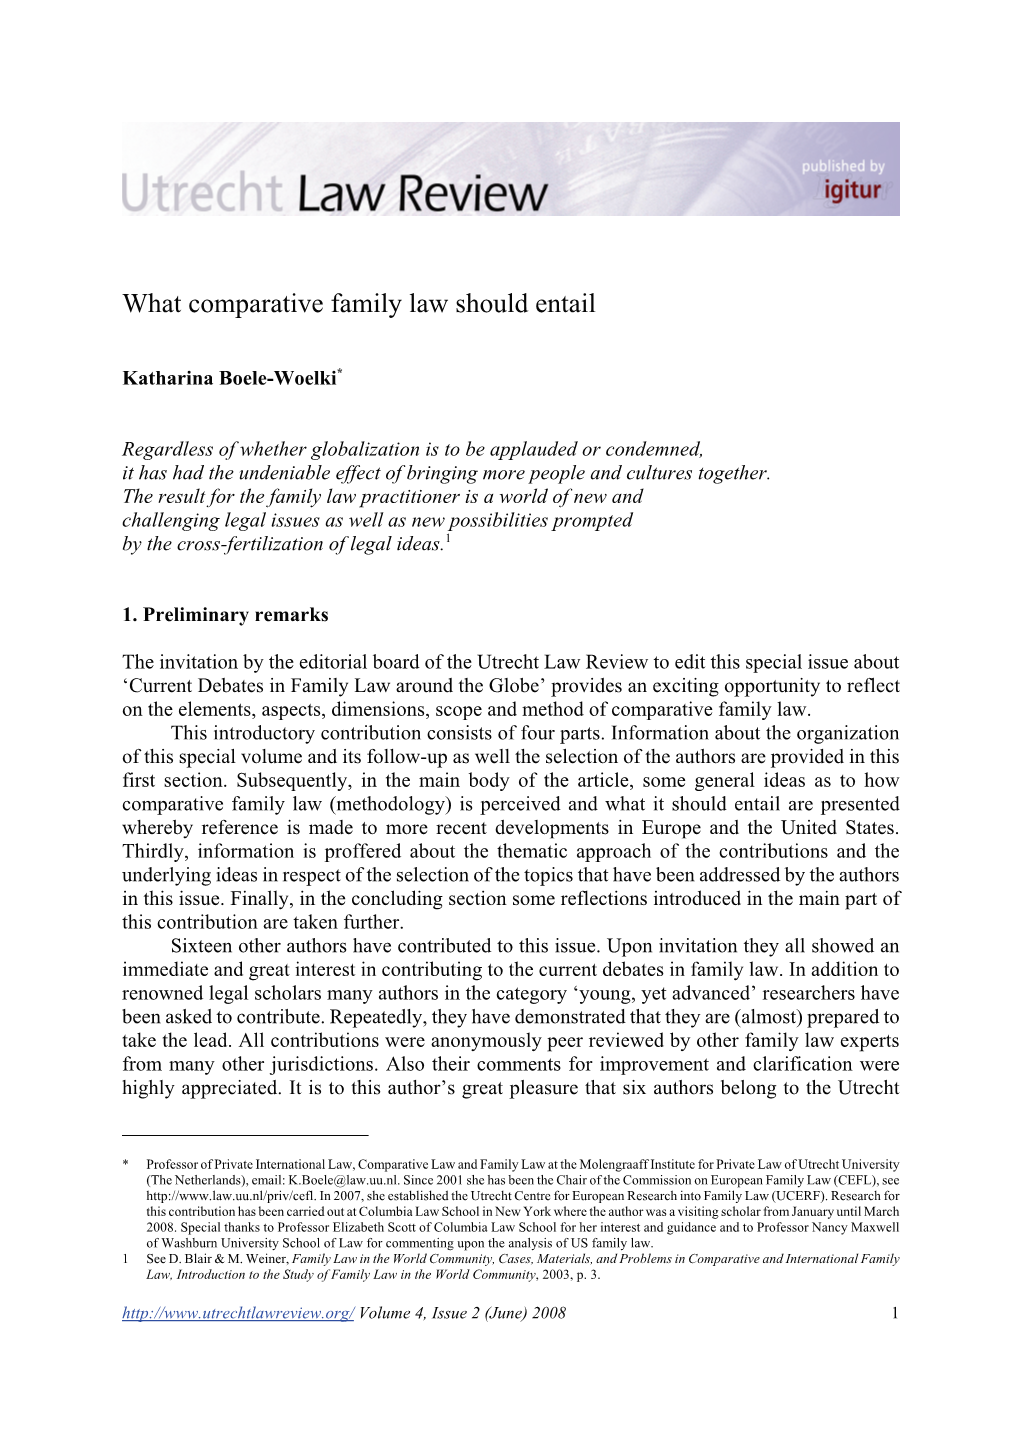 What Comparative Family Law Should Entail